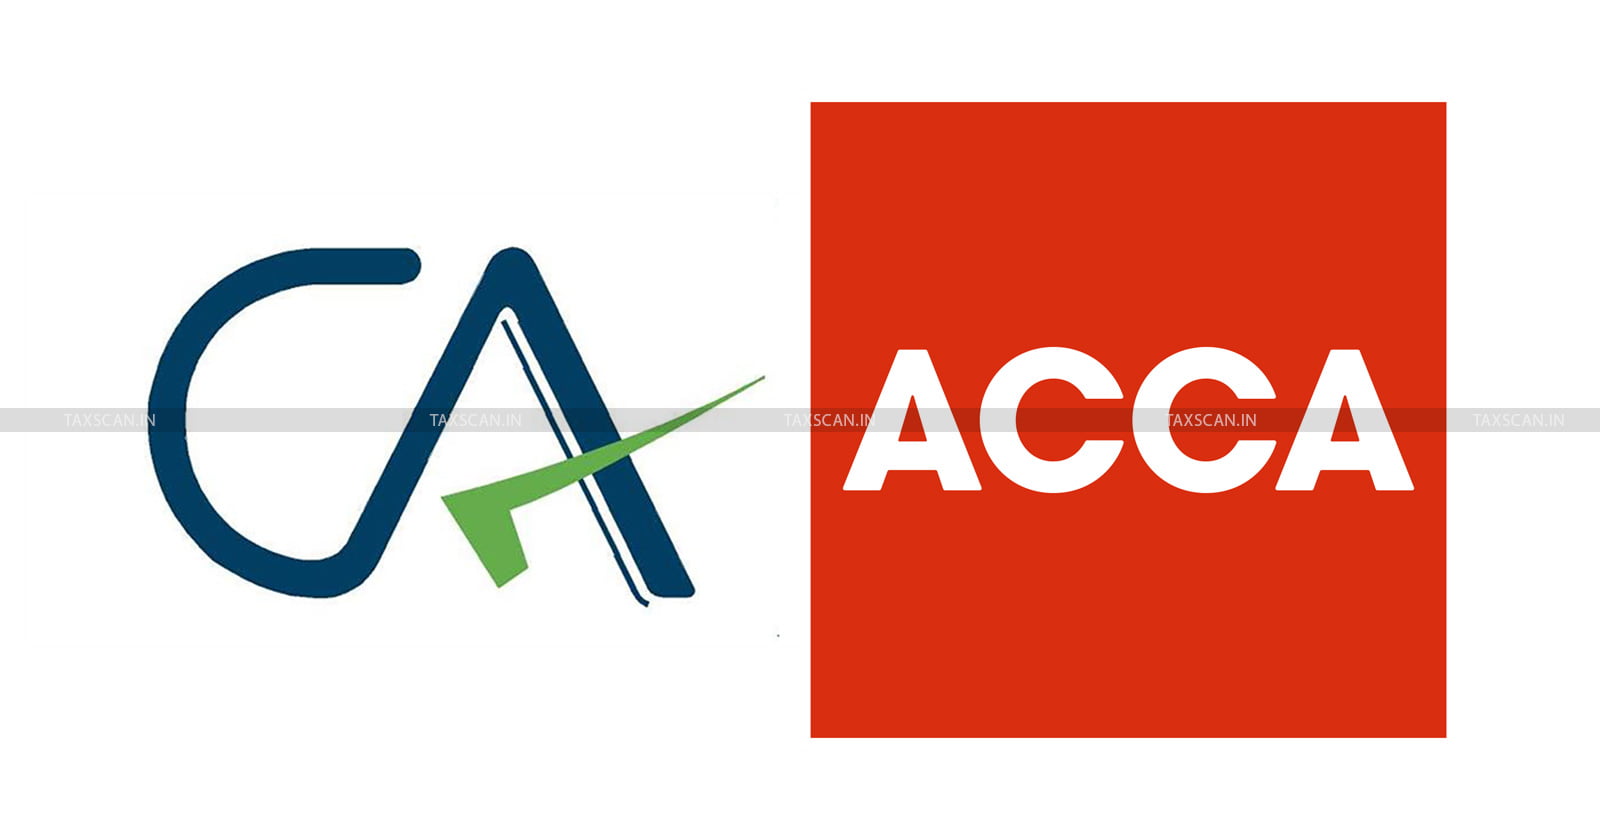 CA Advertisement Controversy - Coaching Institute Receives Legal Notice to Immediately - Withdraw Misleading Advertisement after - ICAI's Involvement - TAXSCAN